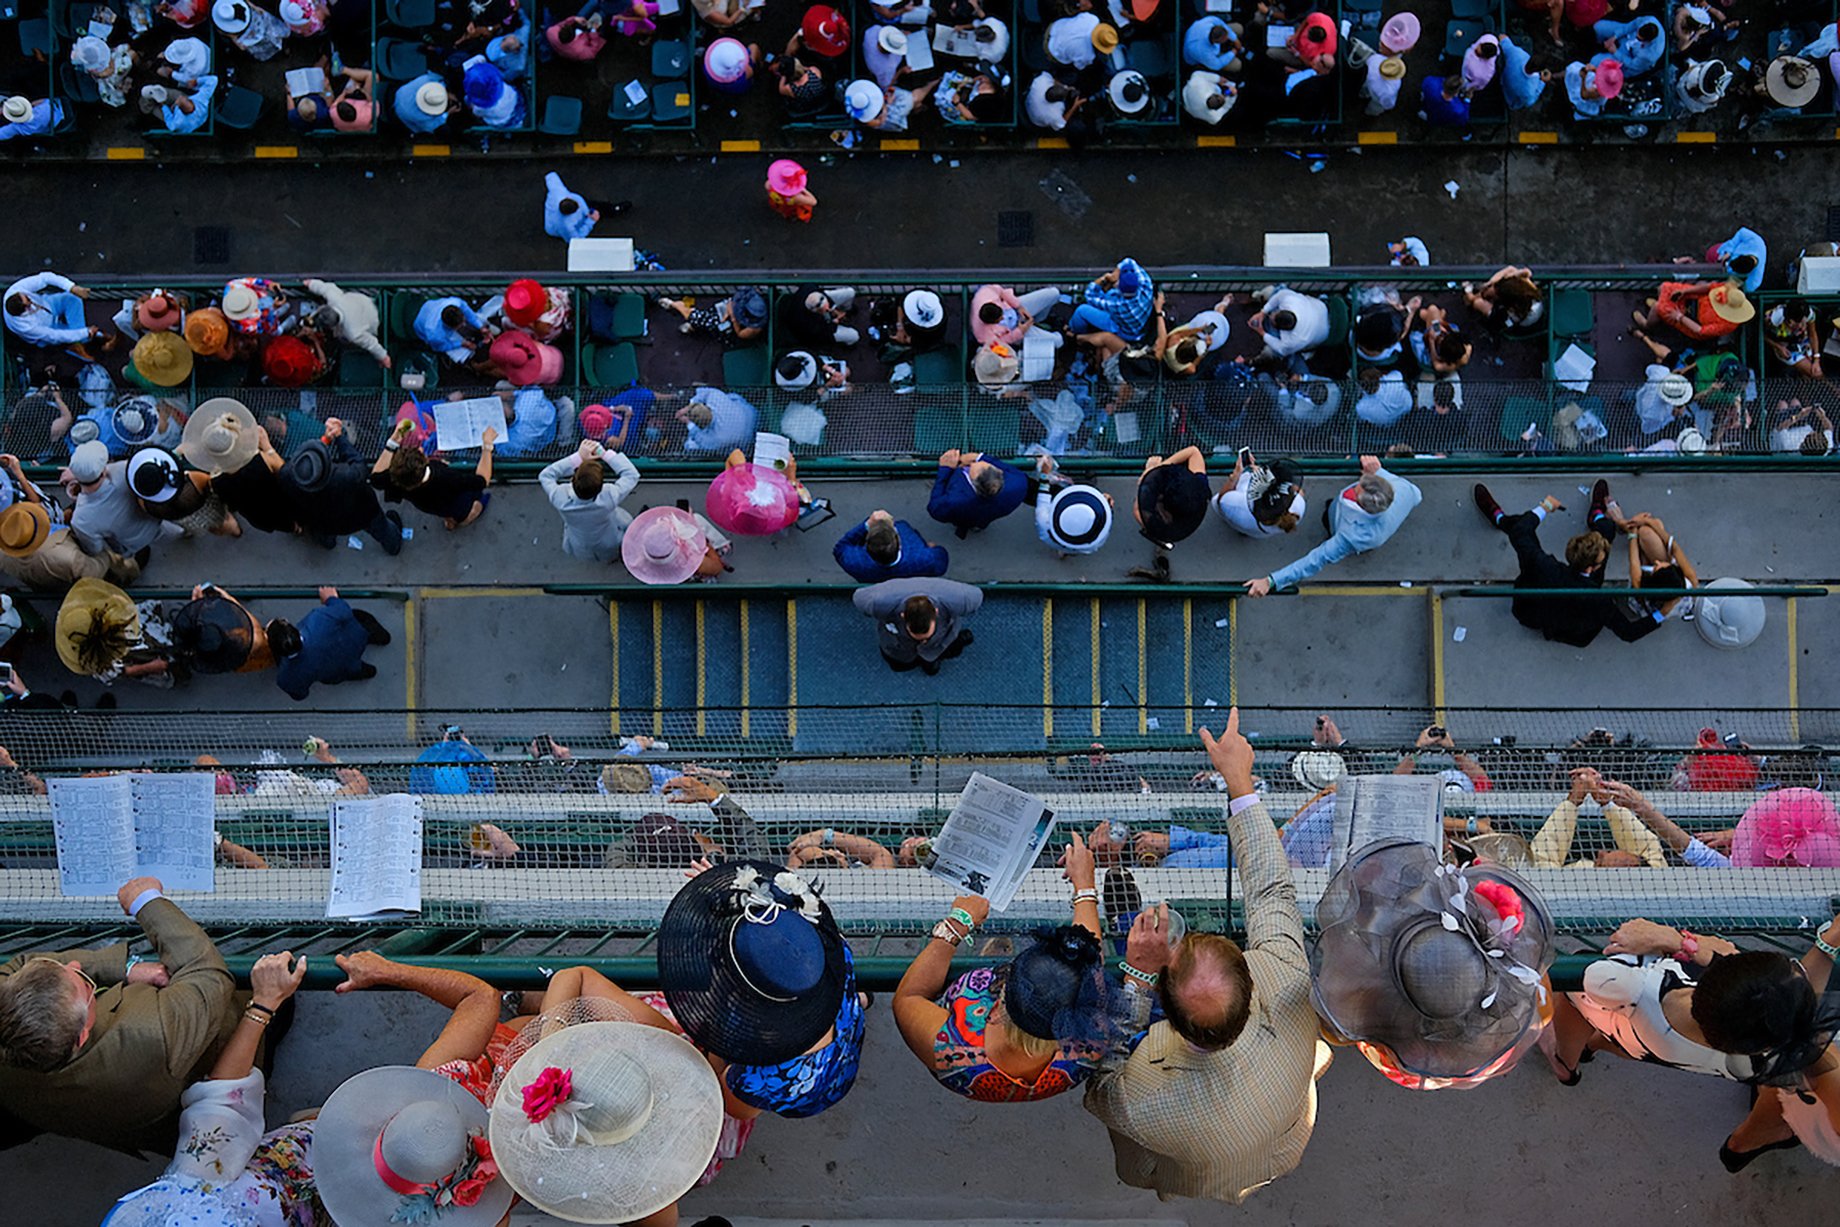 People look out on the balcony before the start of the Kentucky Derby shot by William DeShazer